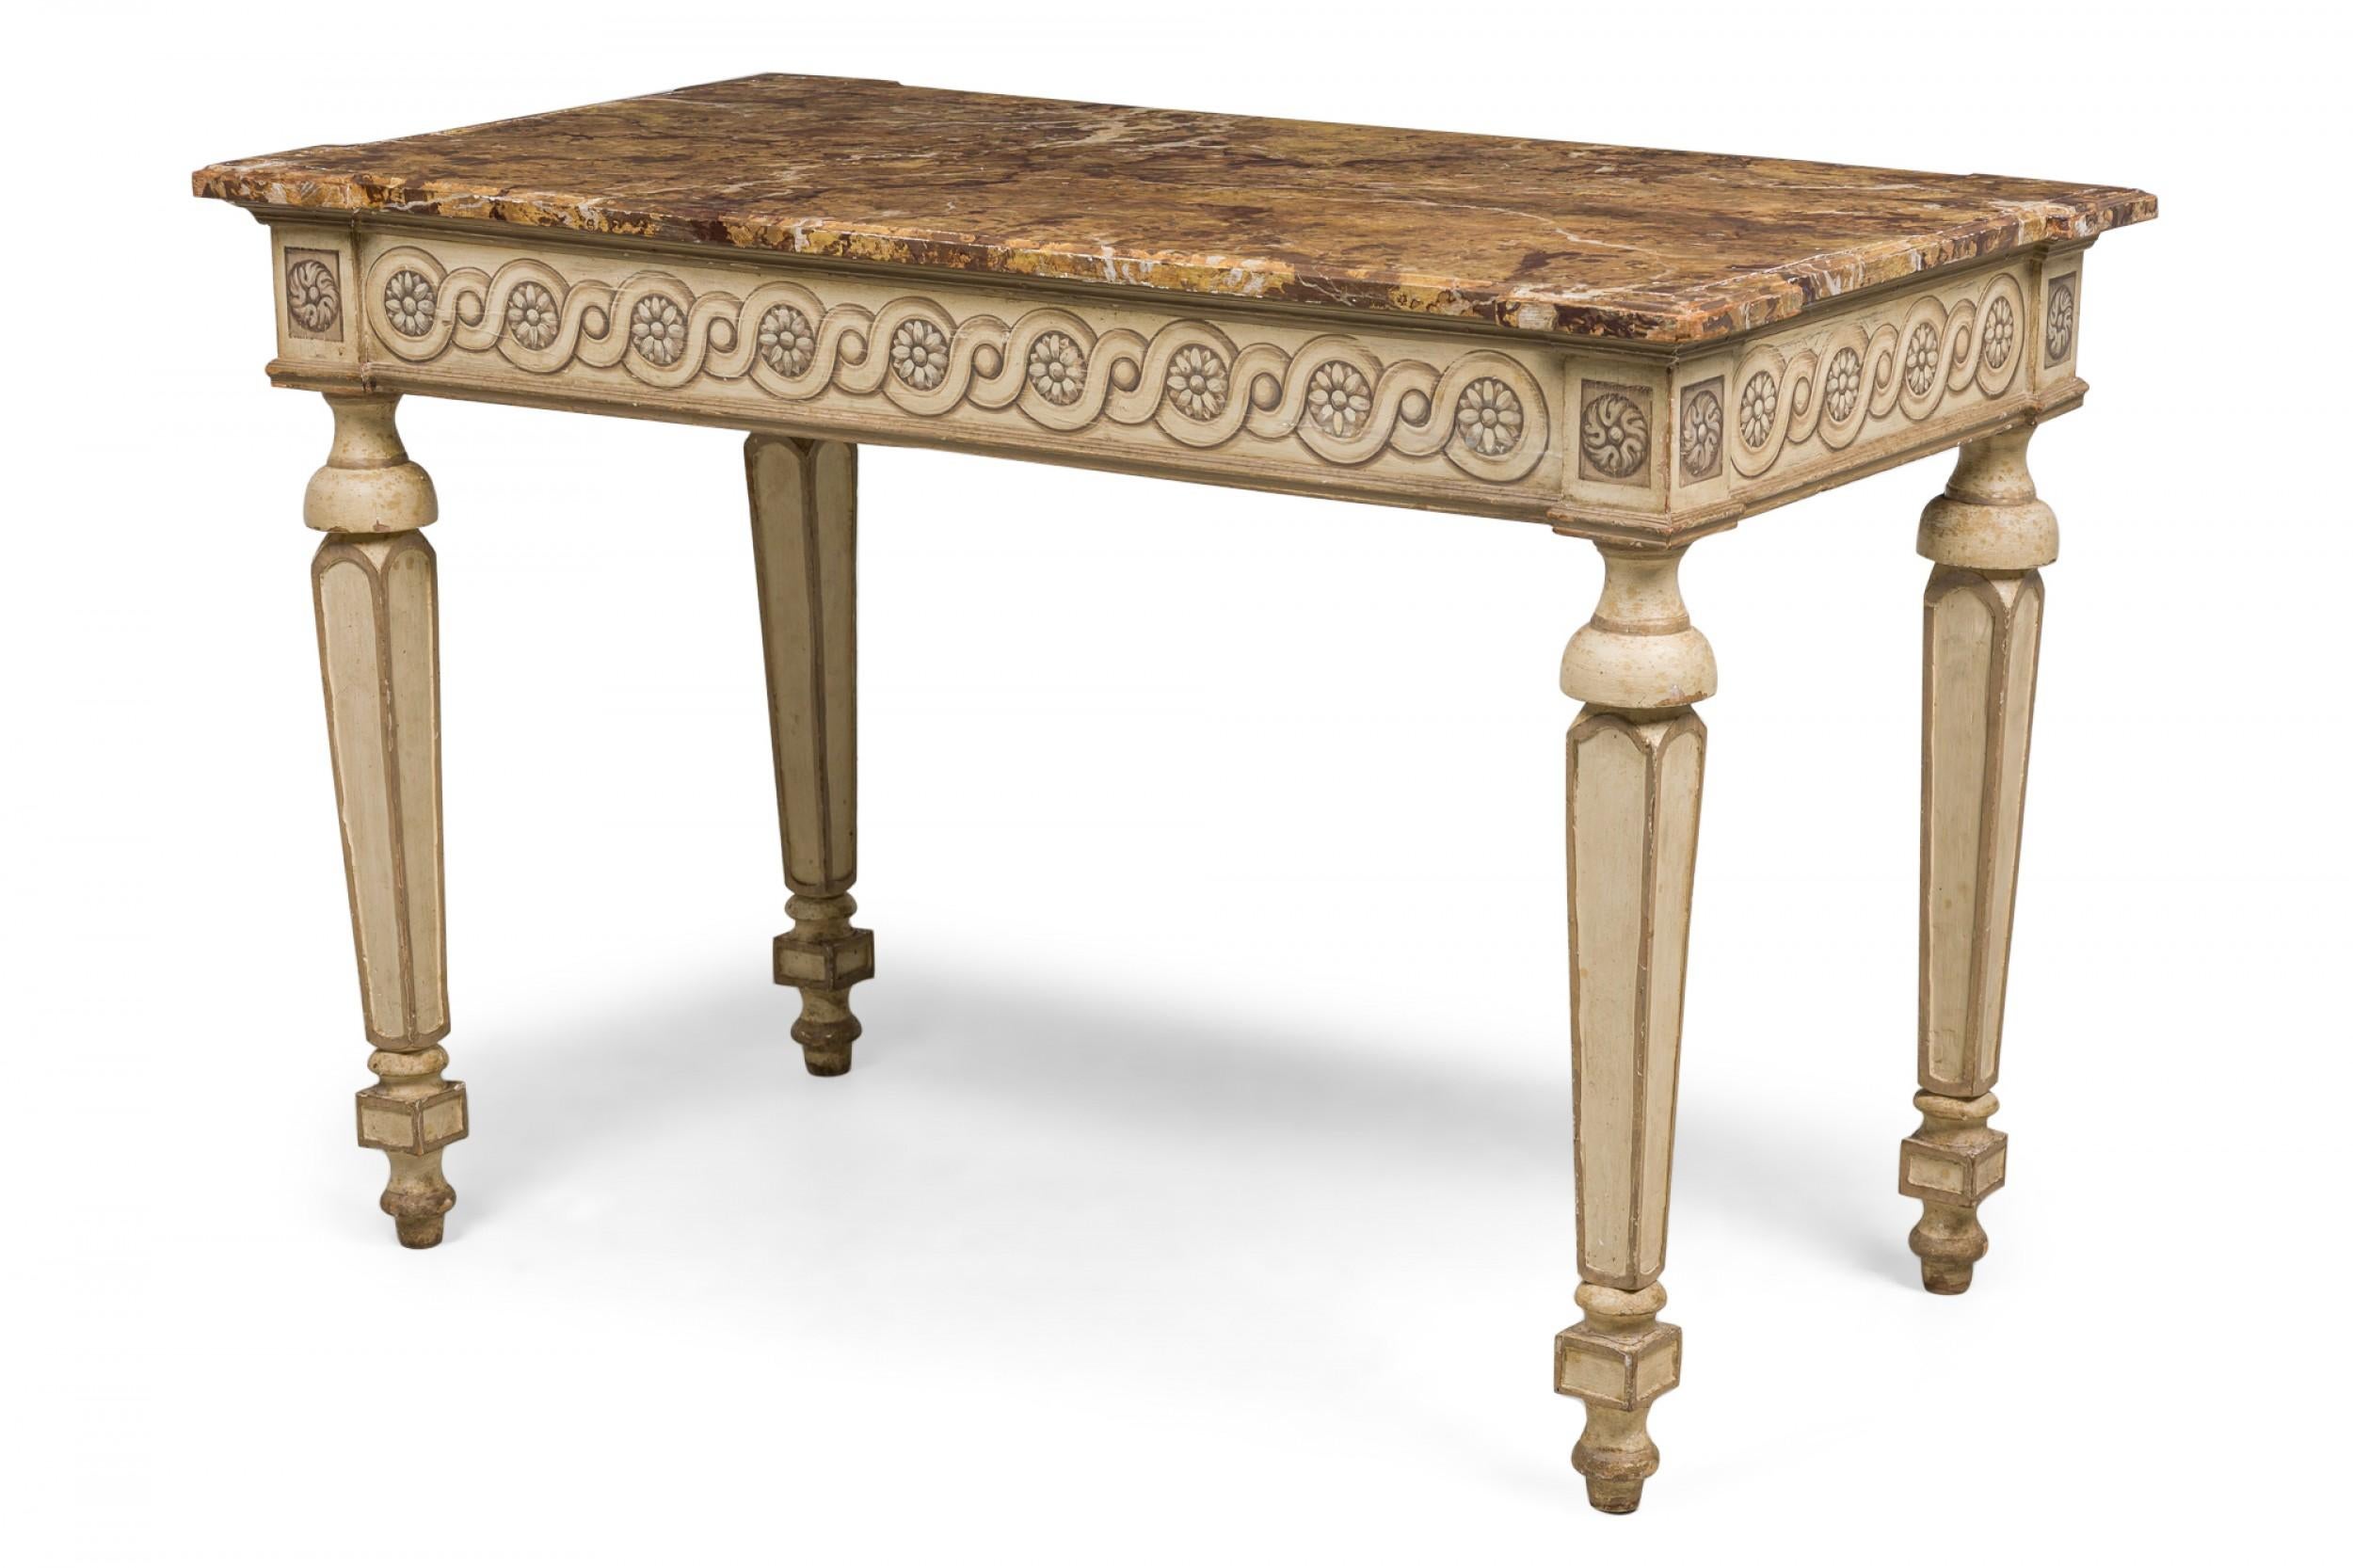 Italian Neo-Classic console / center table with a brown and beige painted faux marble top resting on a beige painted and parcel gilt base with a painted design around the apron and four tapered legs topped with painted rosettes.